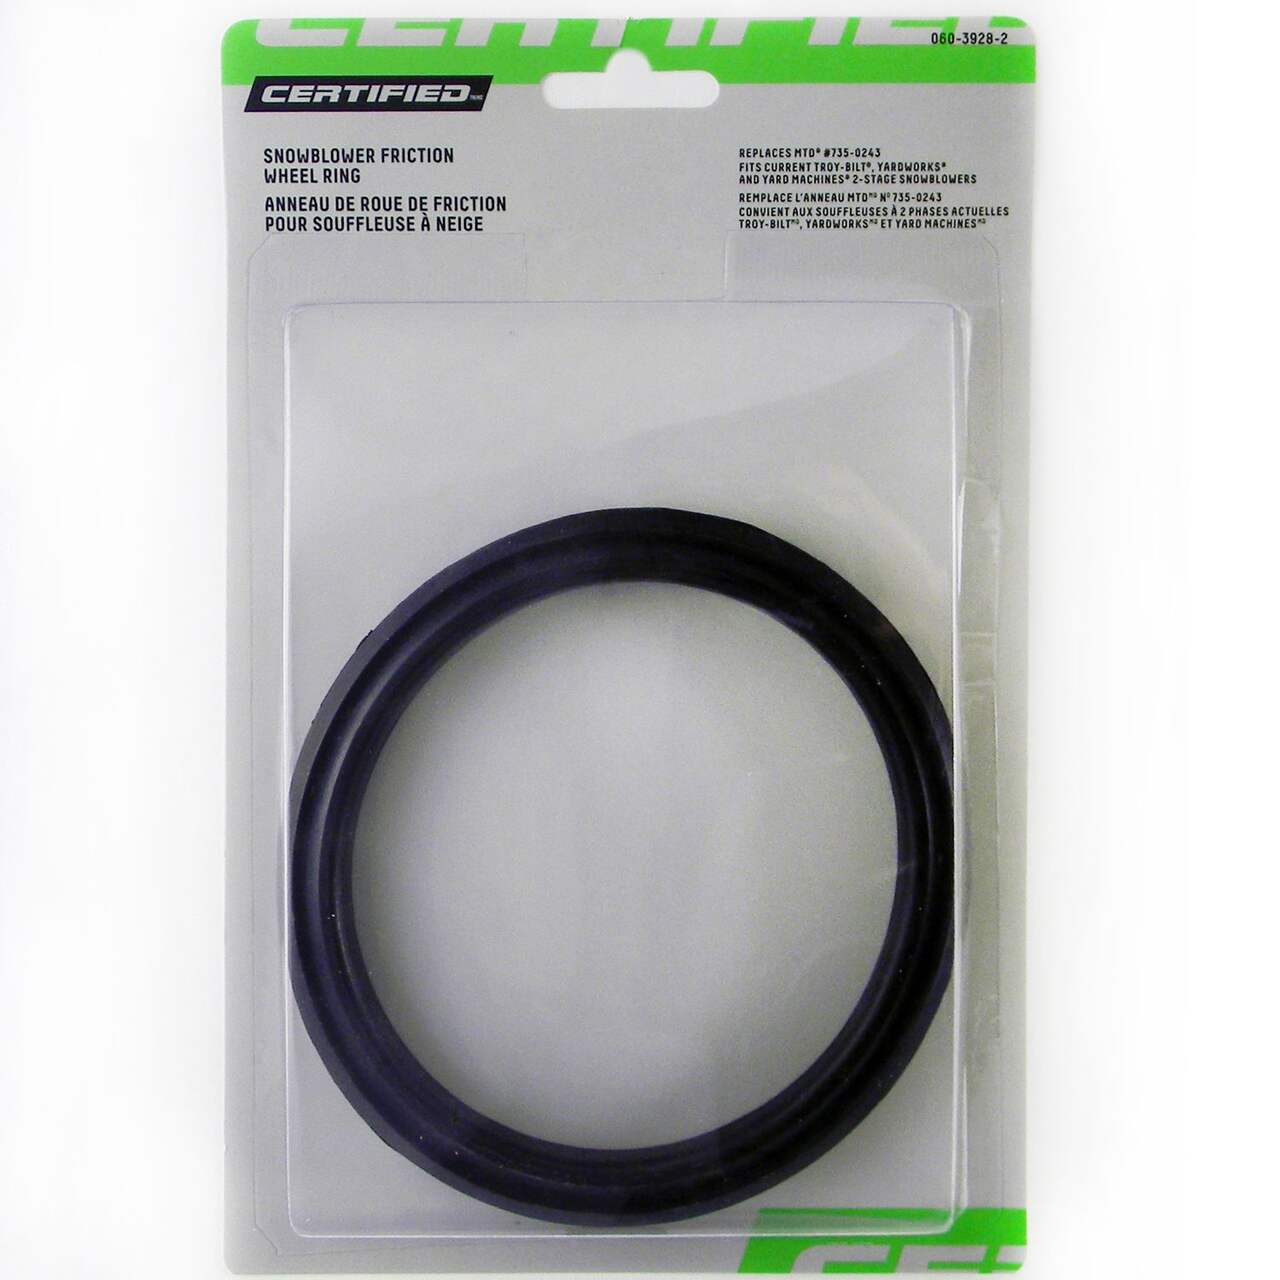 https://media-www.canadiantire.ca/product/seasonal-gardening/outdoor-tools/tractor-lawn-mower-snowthrower-parts/0603928/friction-wheel-ring-65864af4-6f85-410c-8140-8d20023b9c77-jpgrendition.jpg?imdensity=1&imwidth=640&impolicy=mZoom